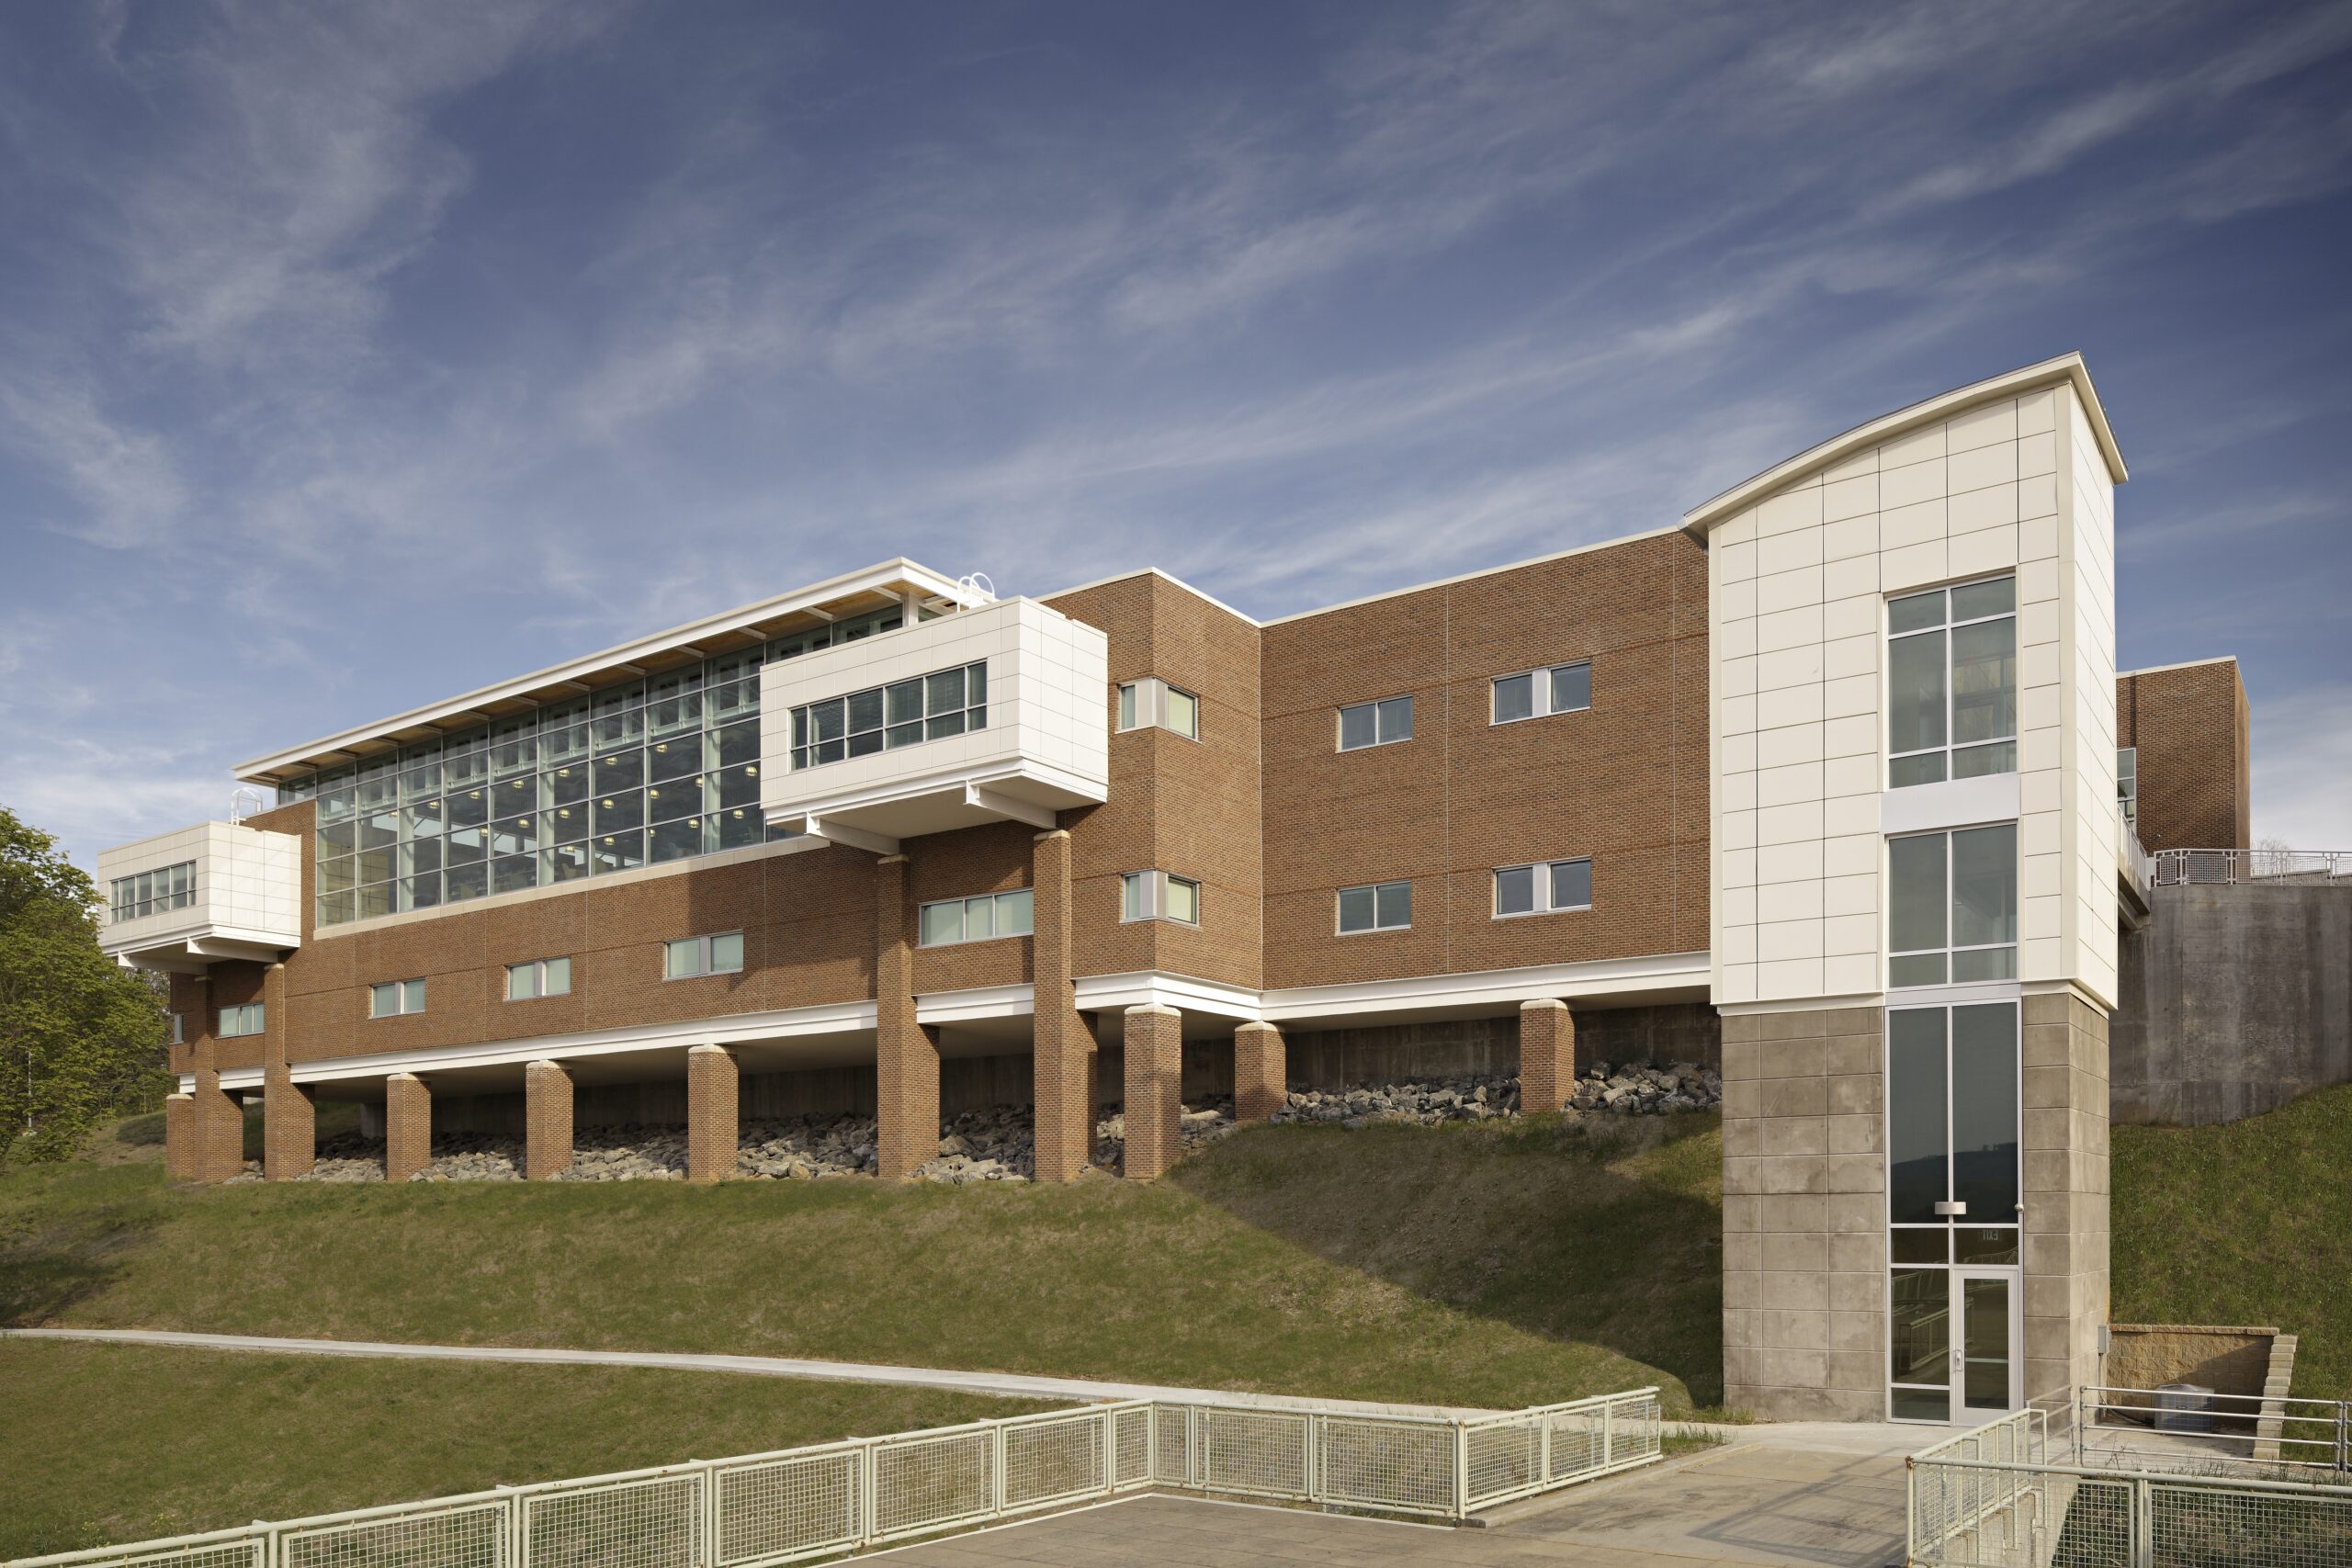 Southwest Virginia Community College: Learning Resource Center